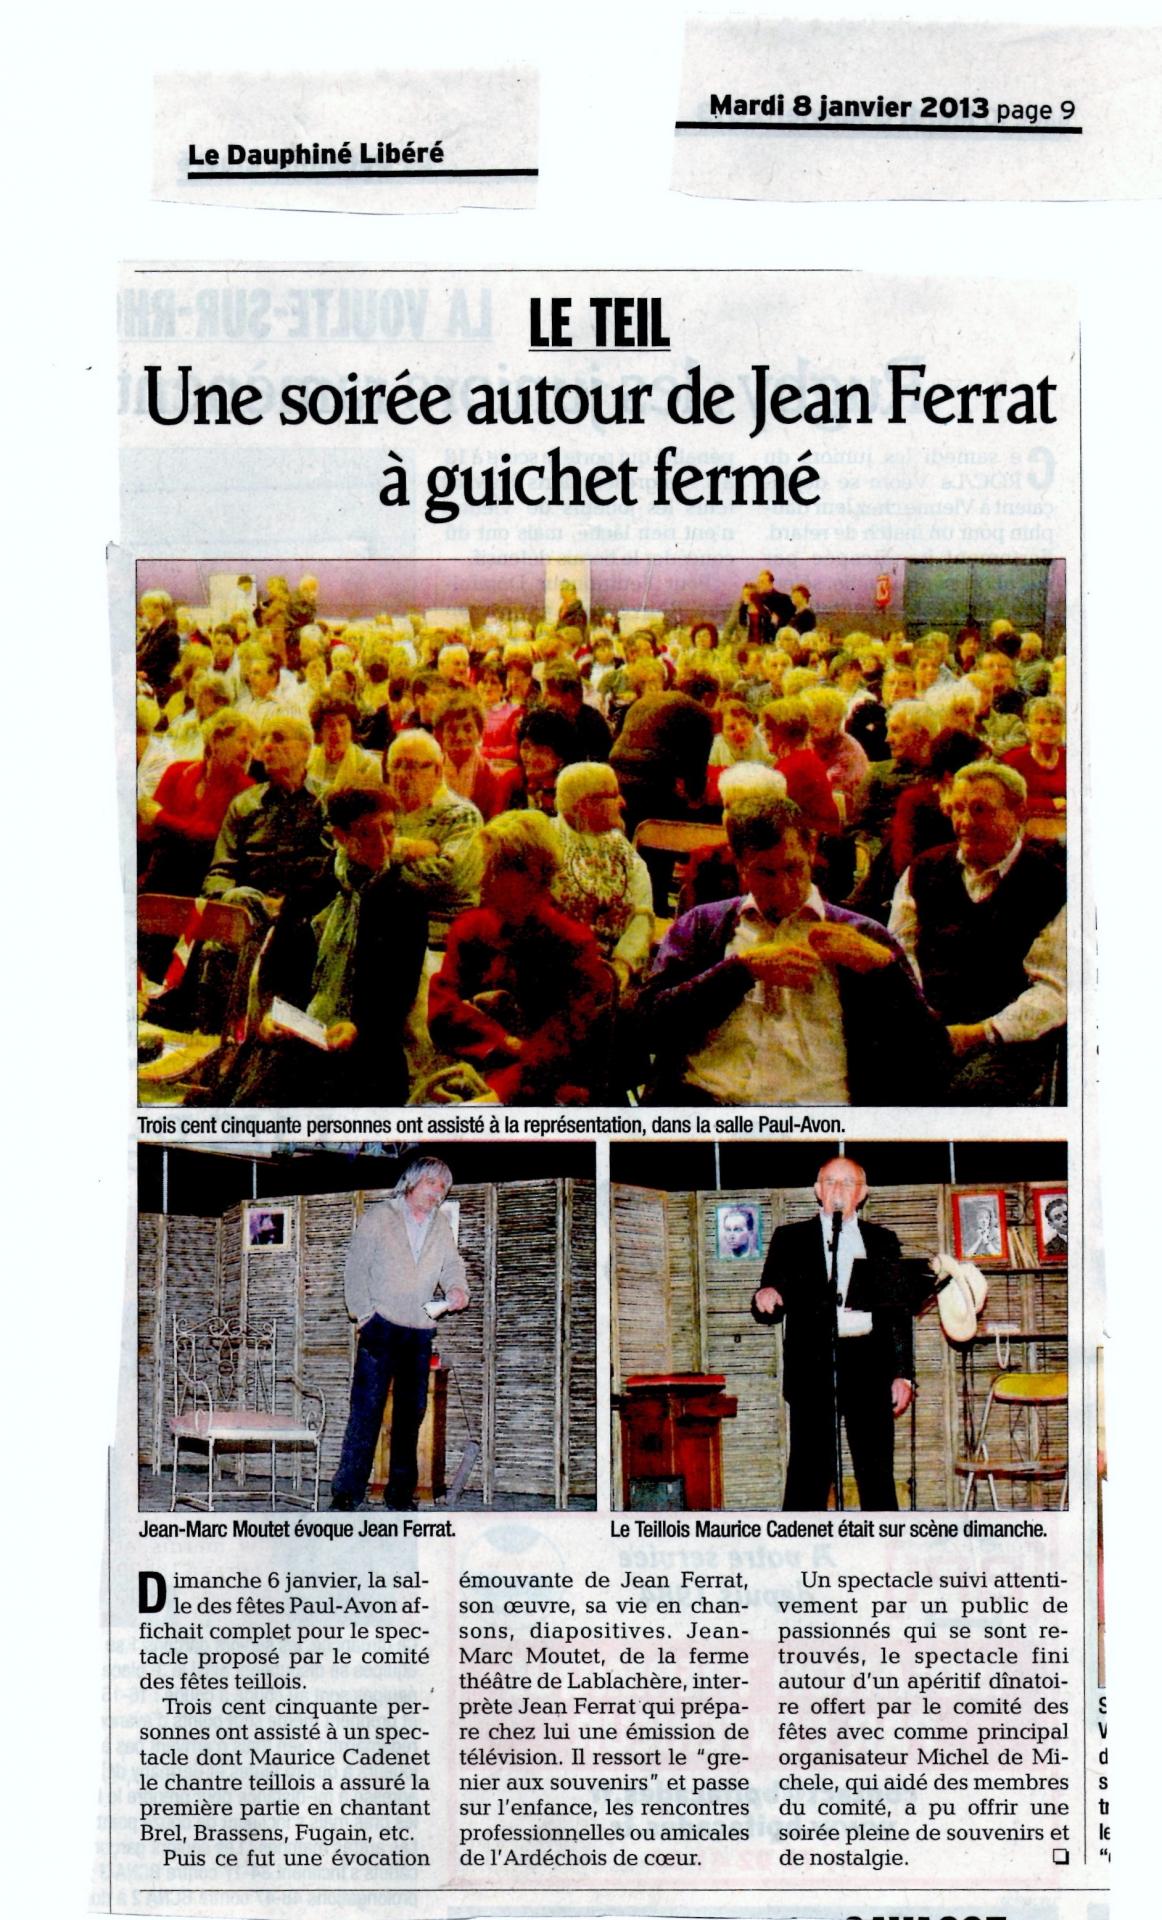 Article dauphine 8 1 13